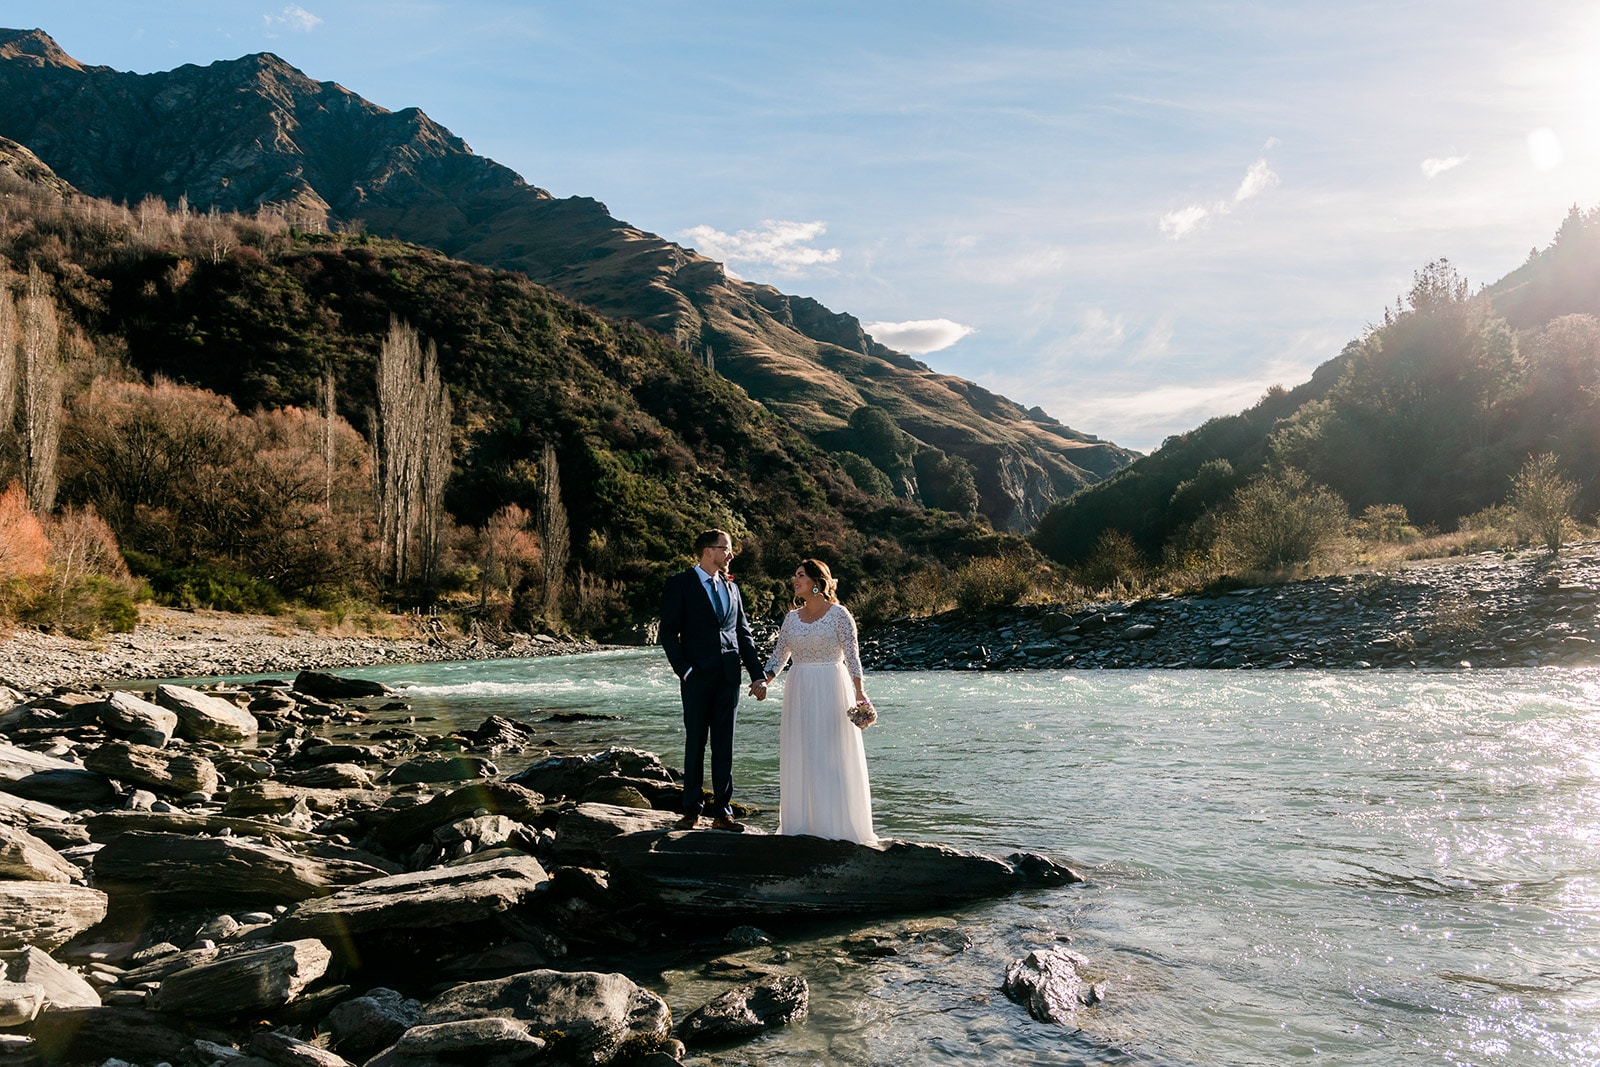 Wedding photos by the river in Queenstown